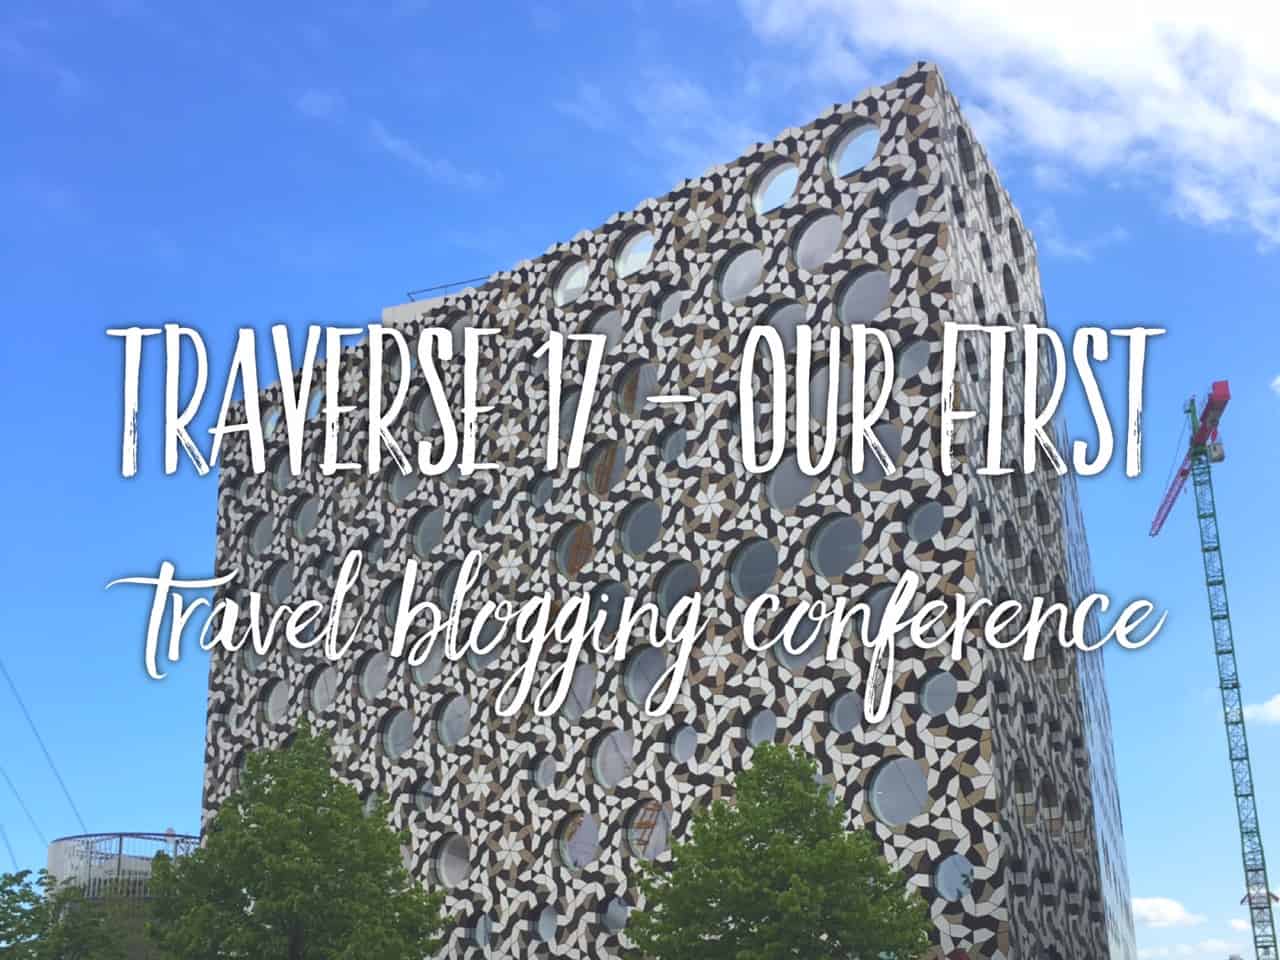 Traverse 2017 Recap – attending our first travel blogger conference